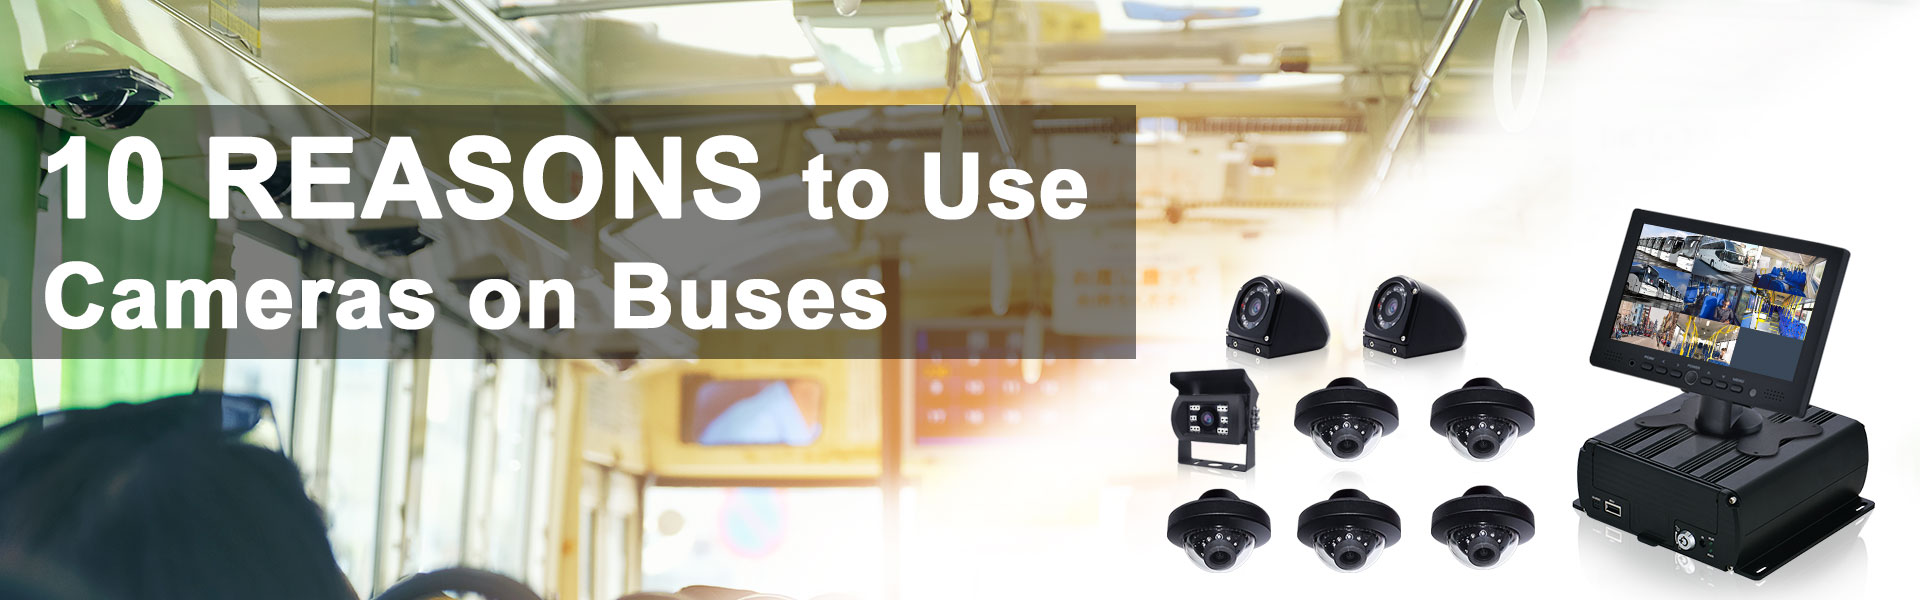 10 Reasons to Use Cameras on Buses